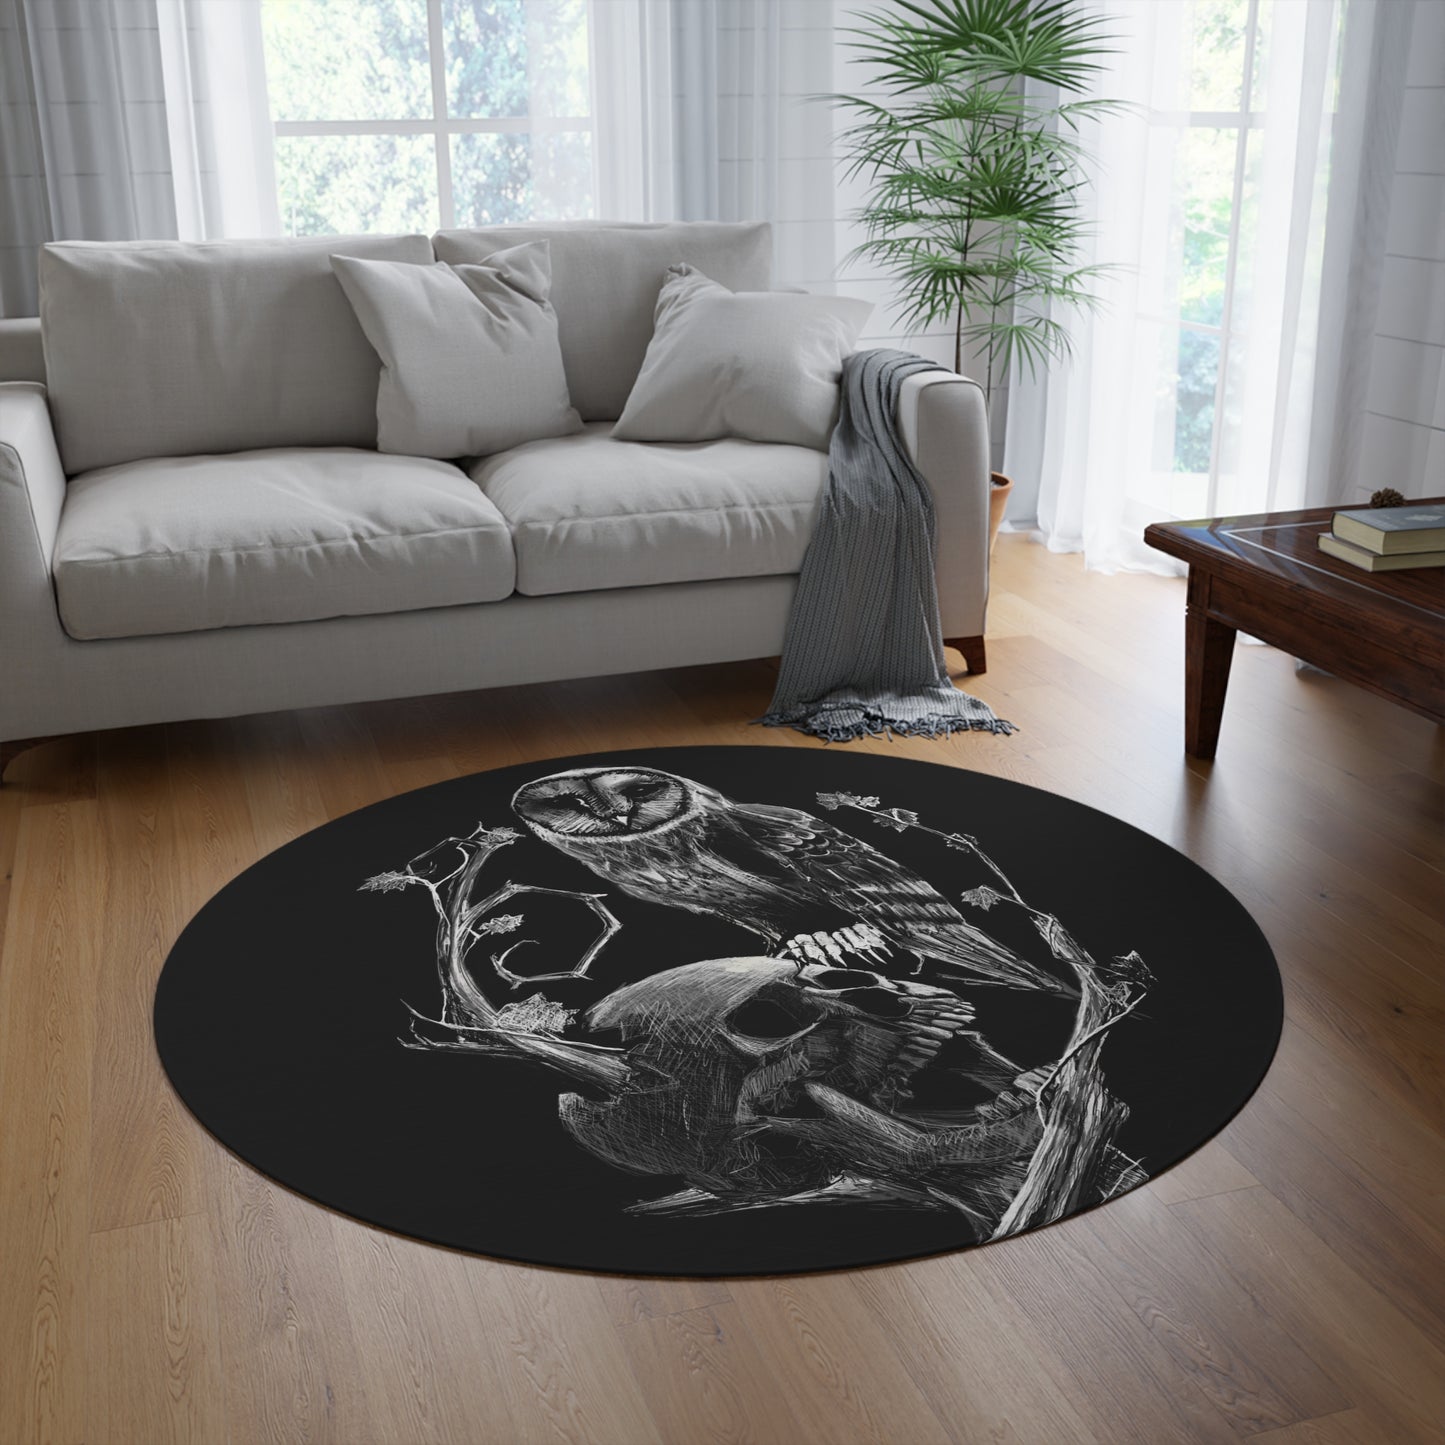 Skull and Owl Round Rug